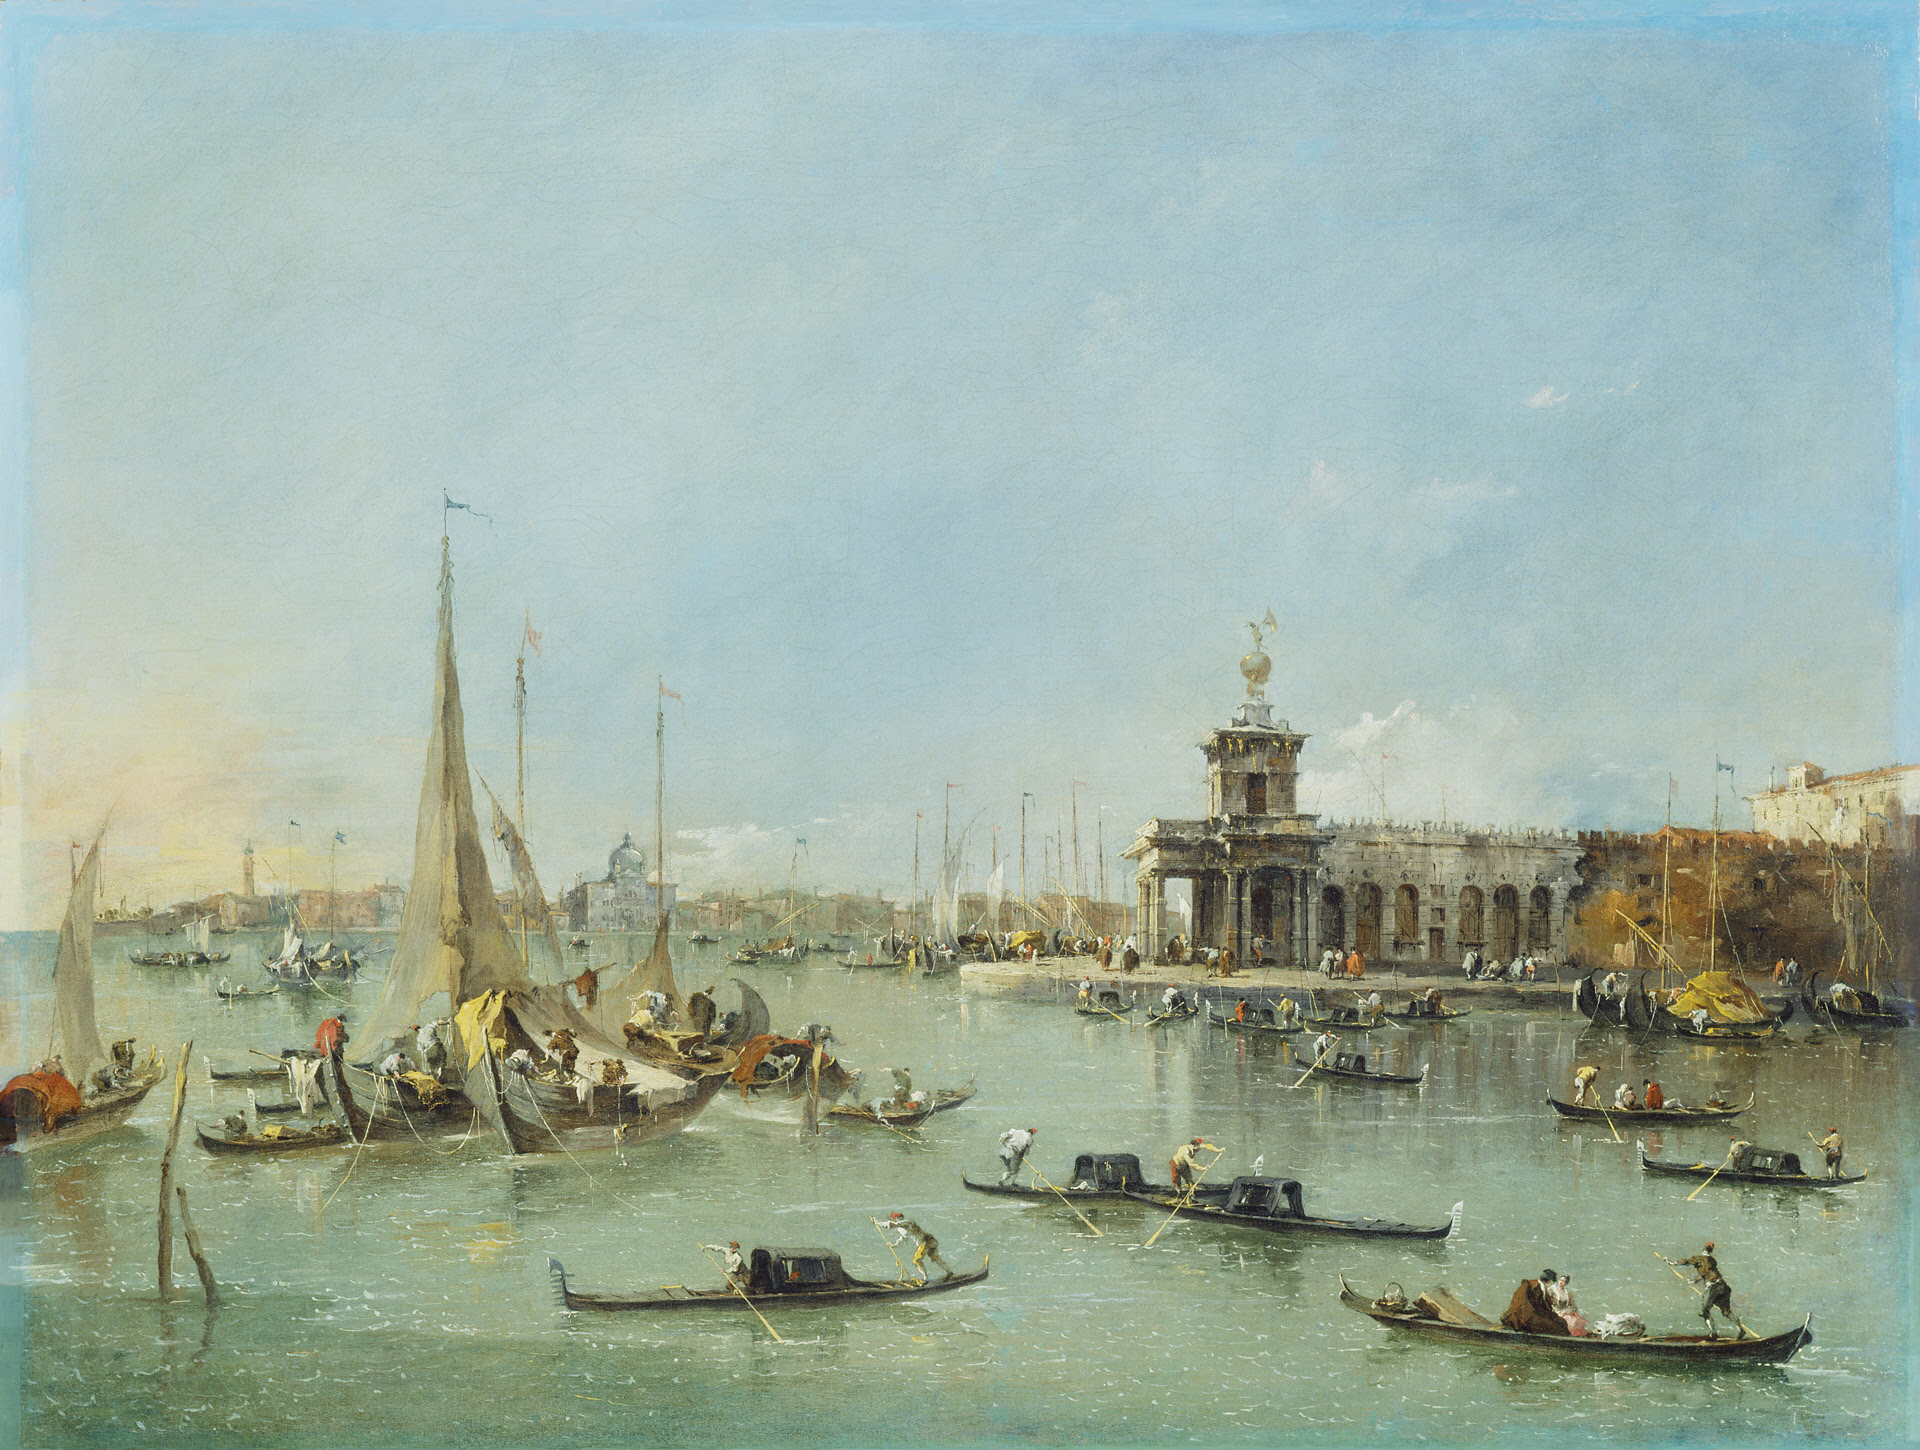 A World Elsewhere: The vedute artists who painted Venice - Canaletto ...